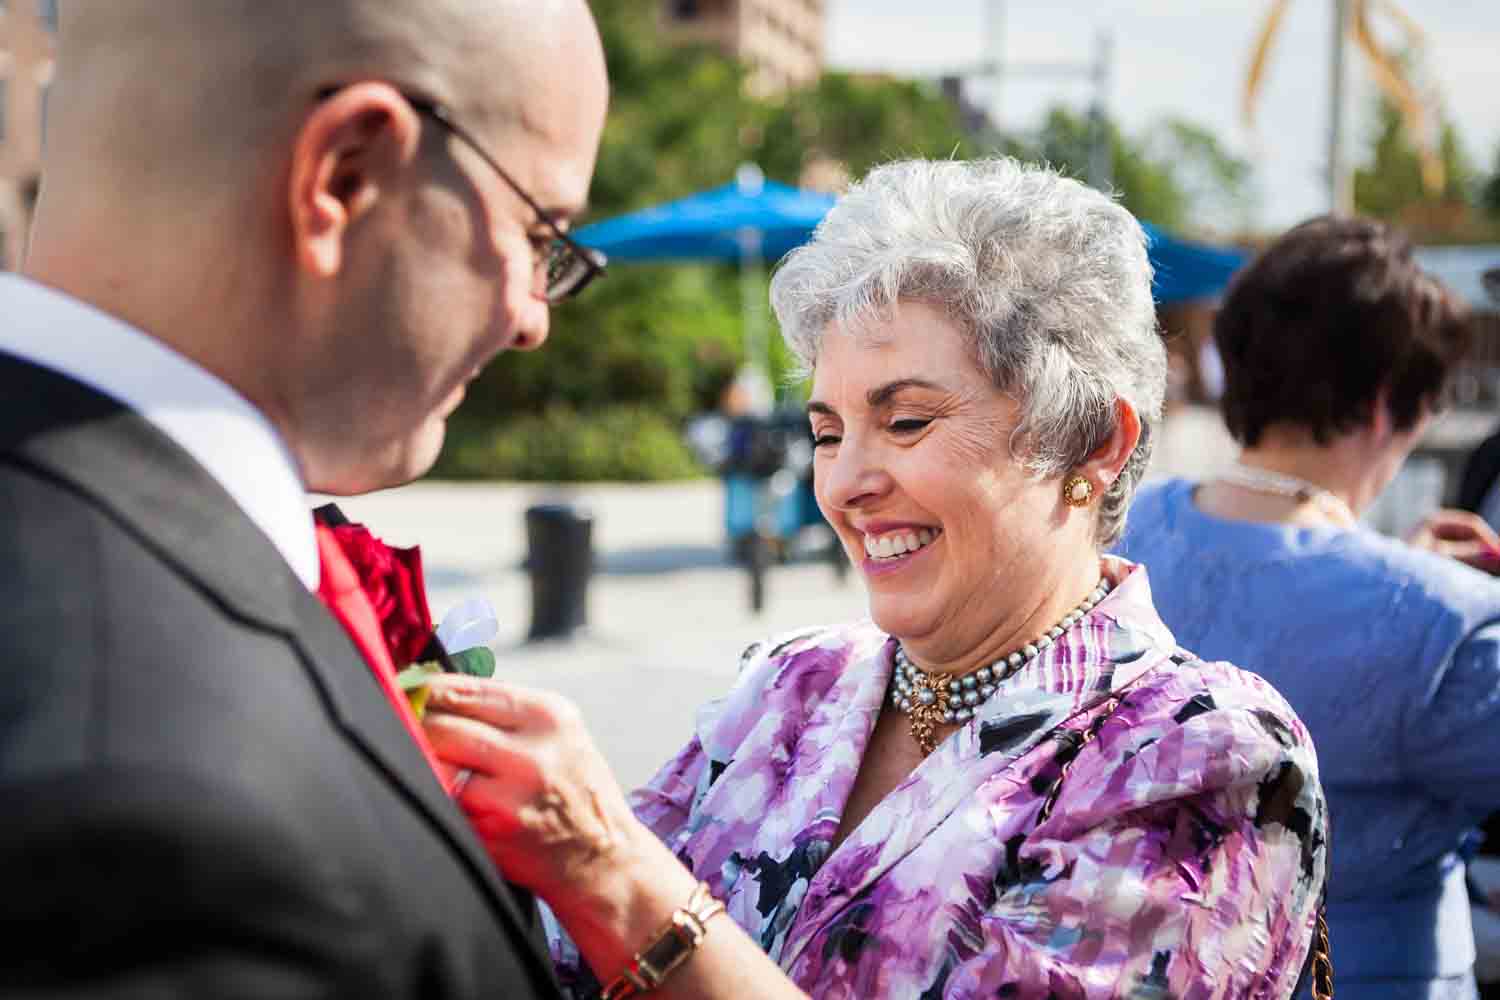 Mother putting boutonniere on groom